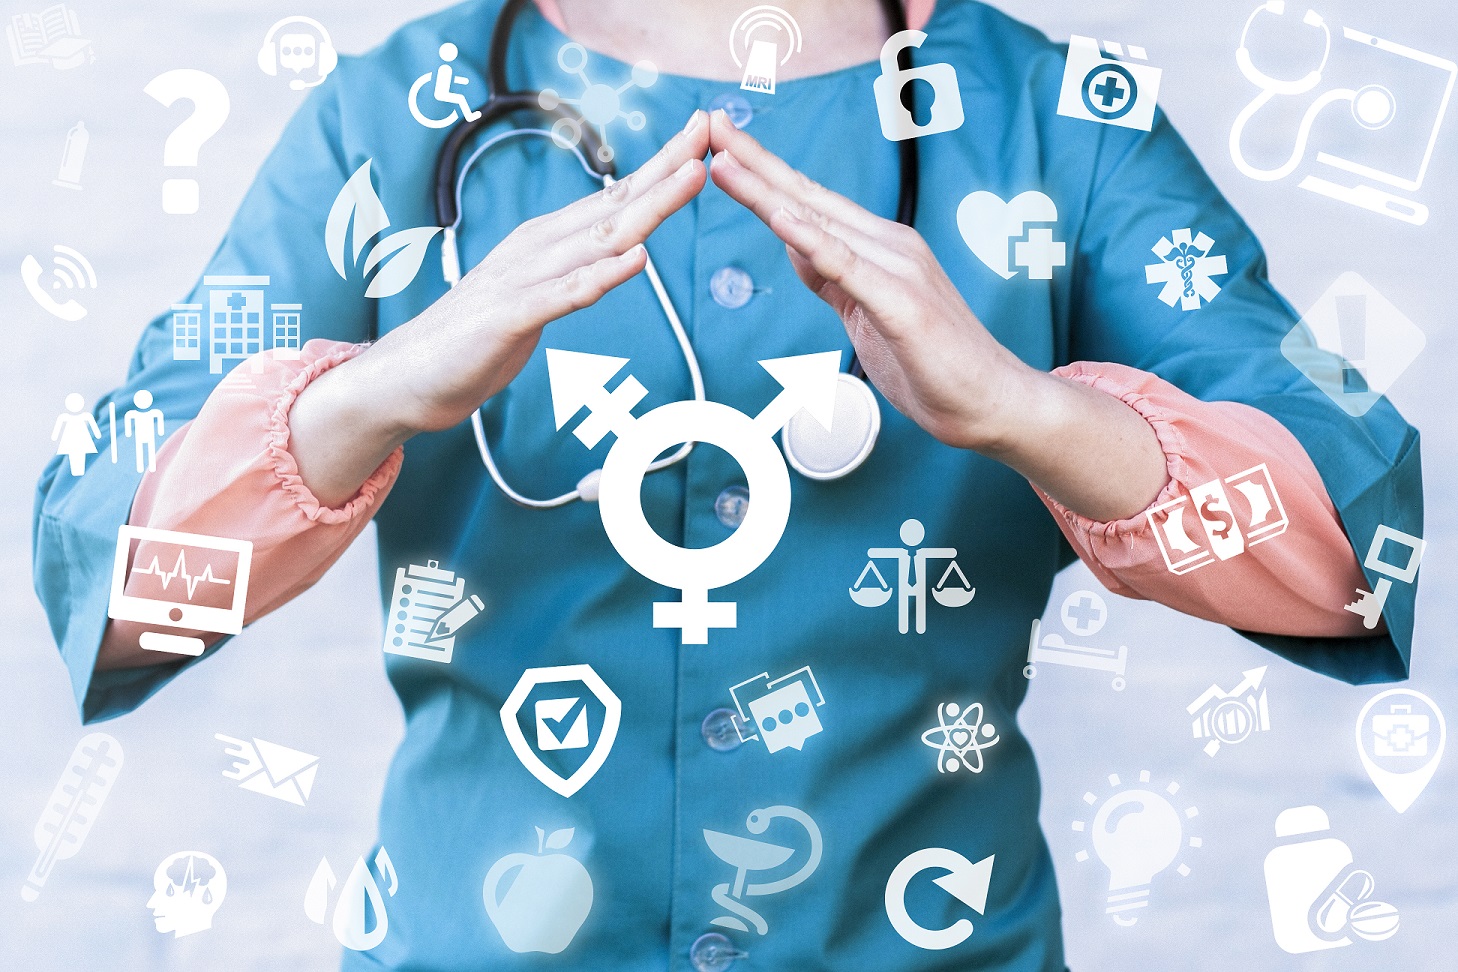 An image of a person wearing scrubs with a stethoscope around their neck. They are touching their hands over the transgender symbol. There are other medical symbols surrounding the person.